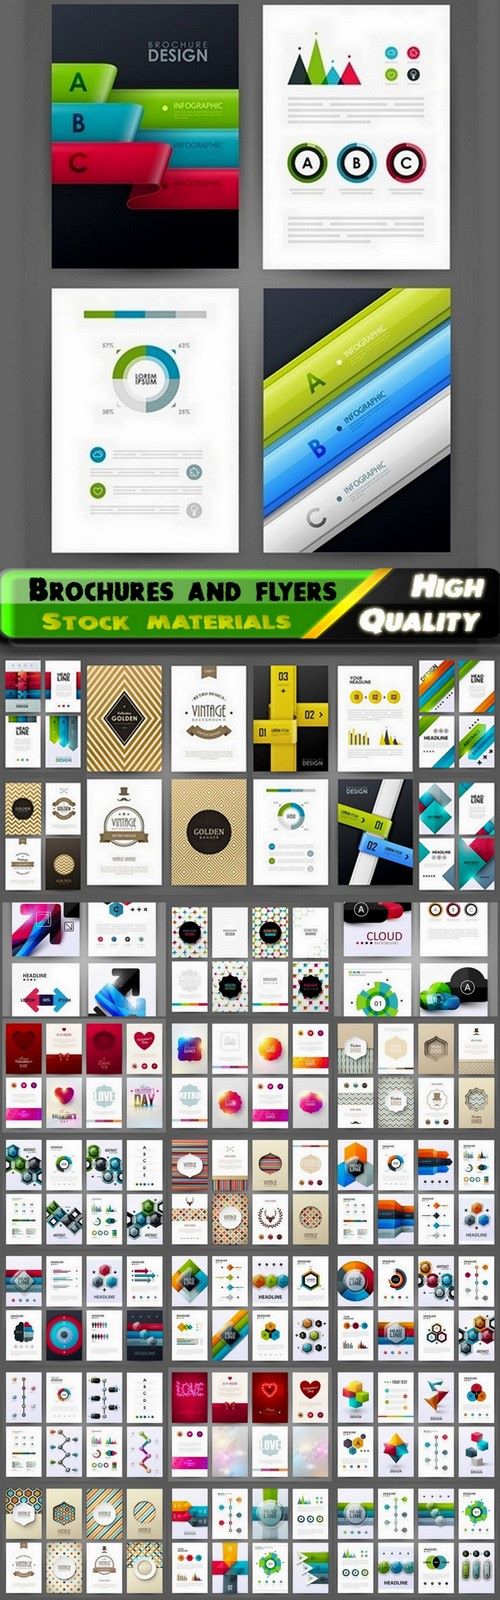 Brochures and flyers with infographic elements 2 - 25 Eps